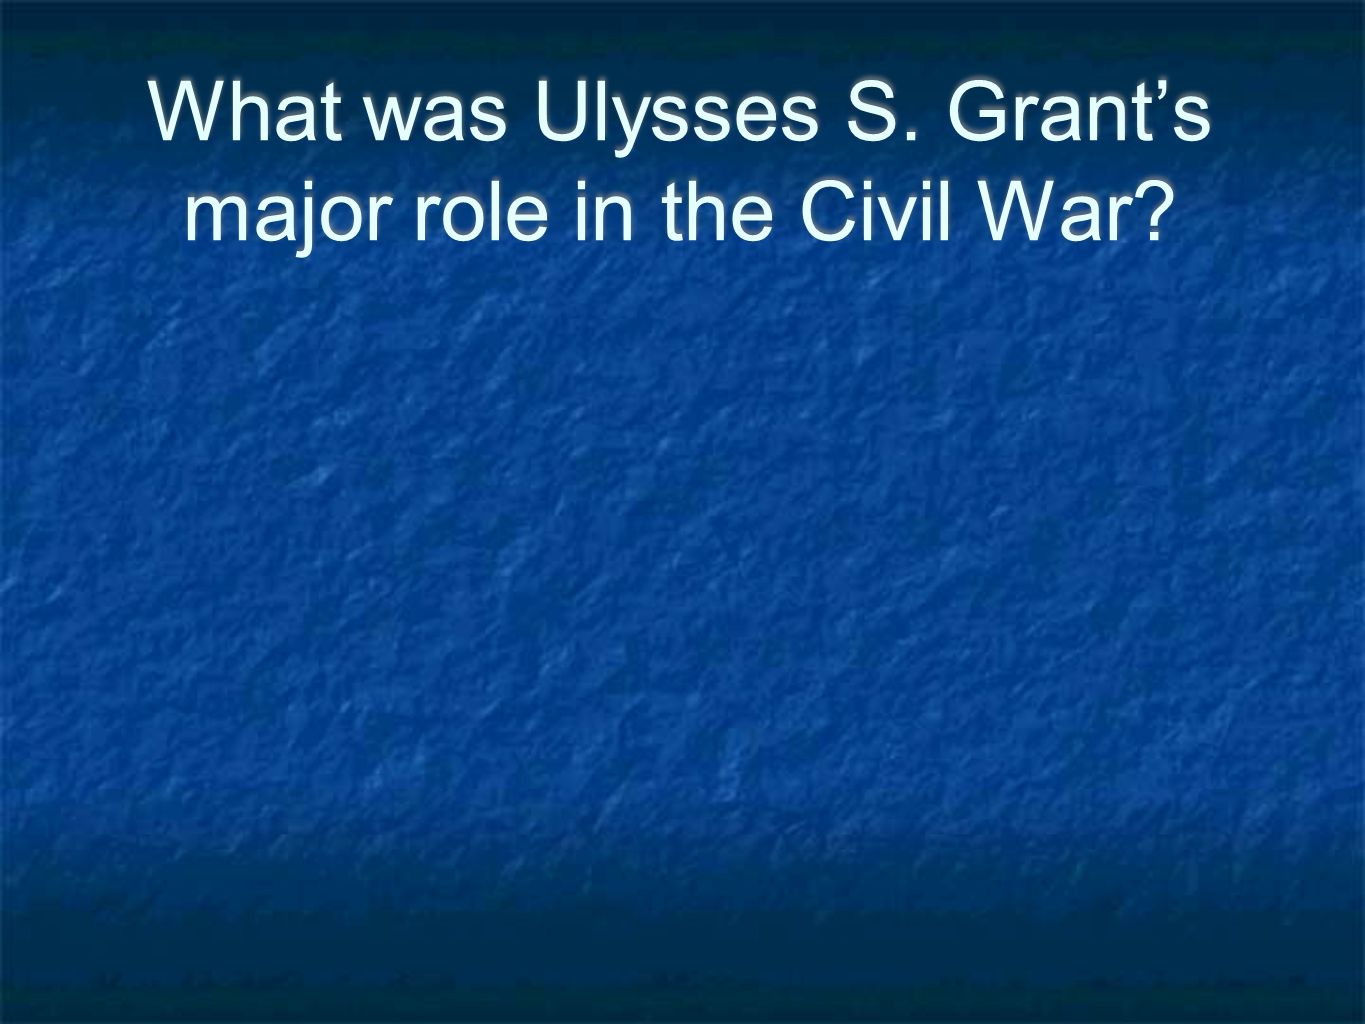 What was Ulysses S. Grant’s major role in the Civil War